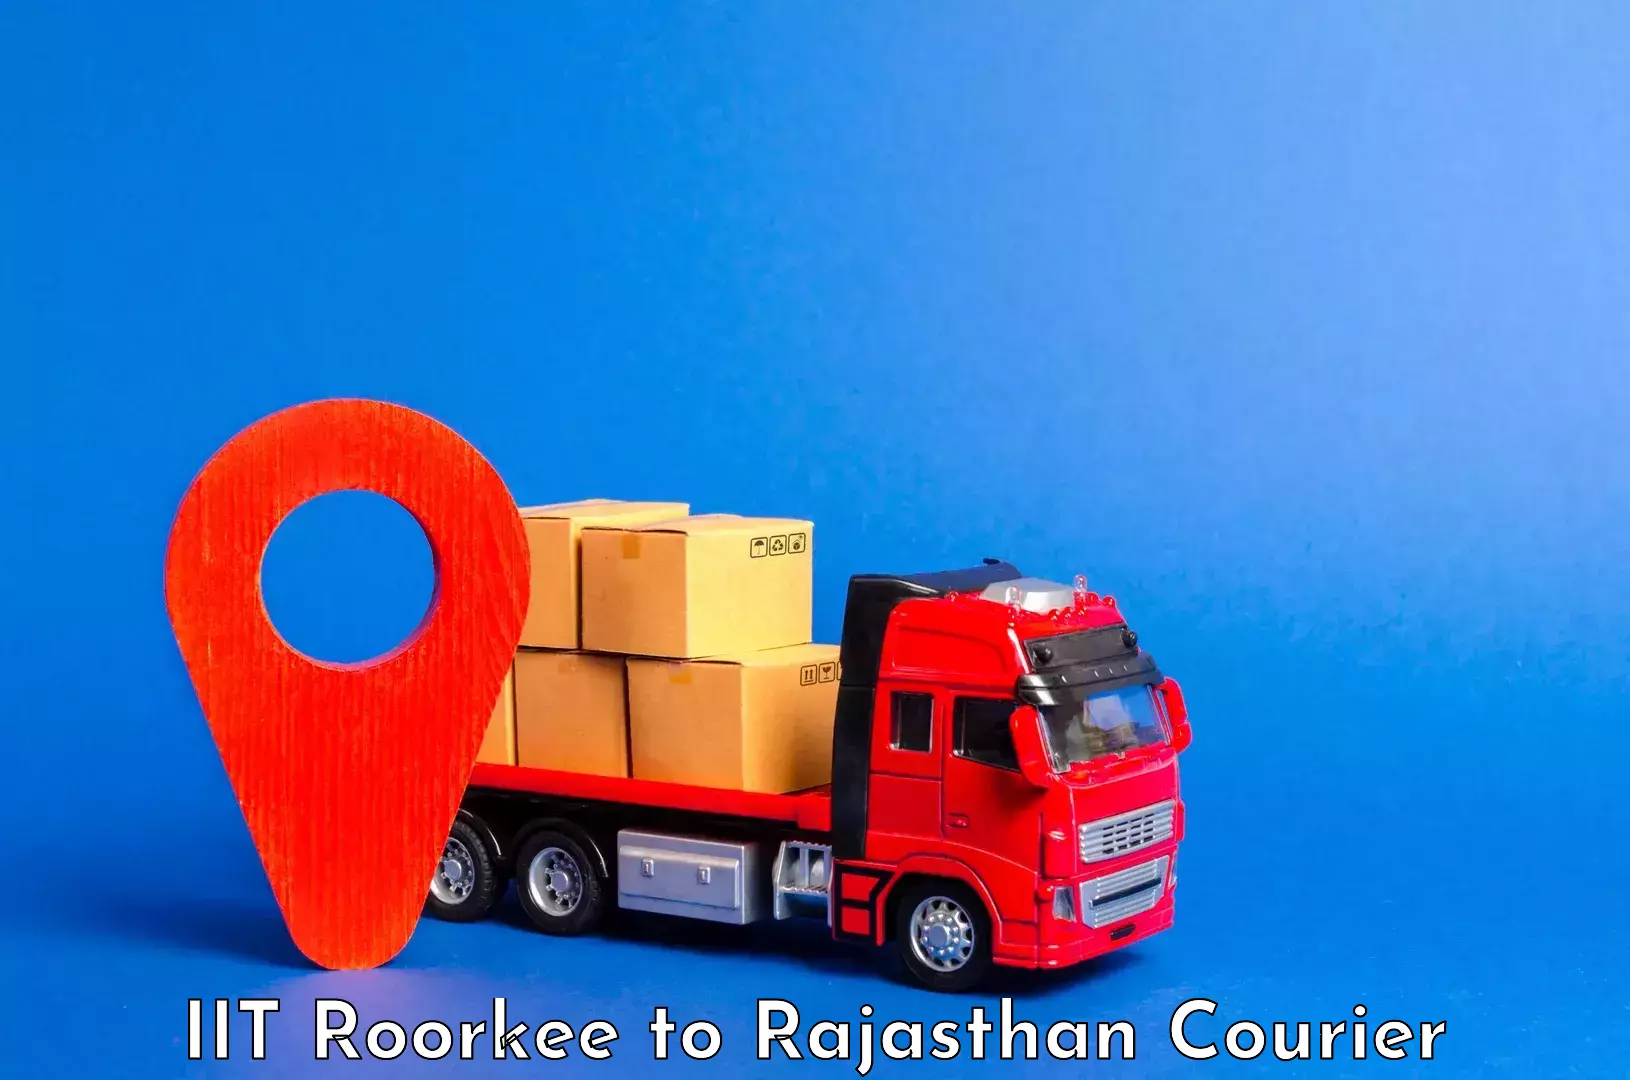 Same day baggage transport in IIT Roorkee to Tonk